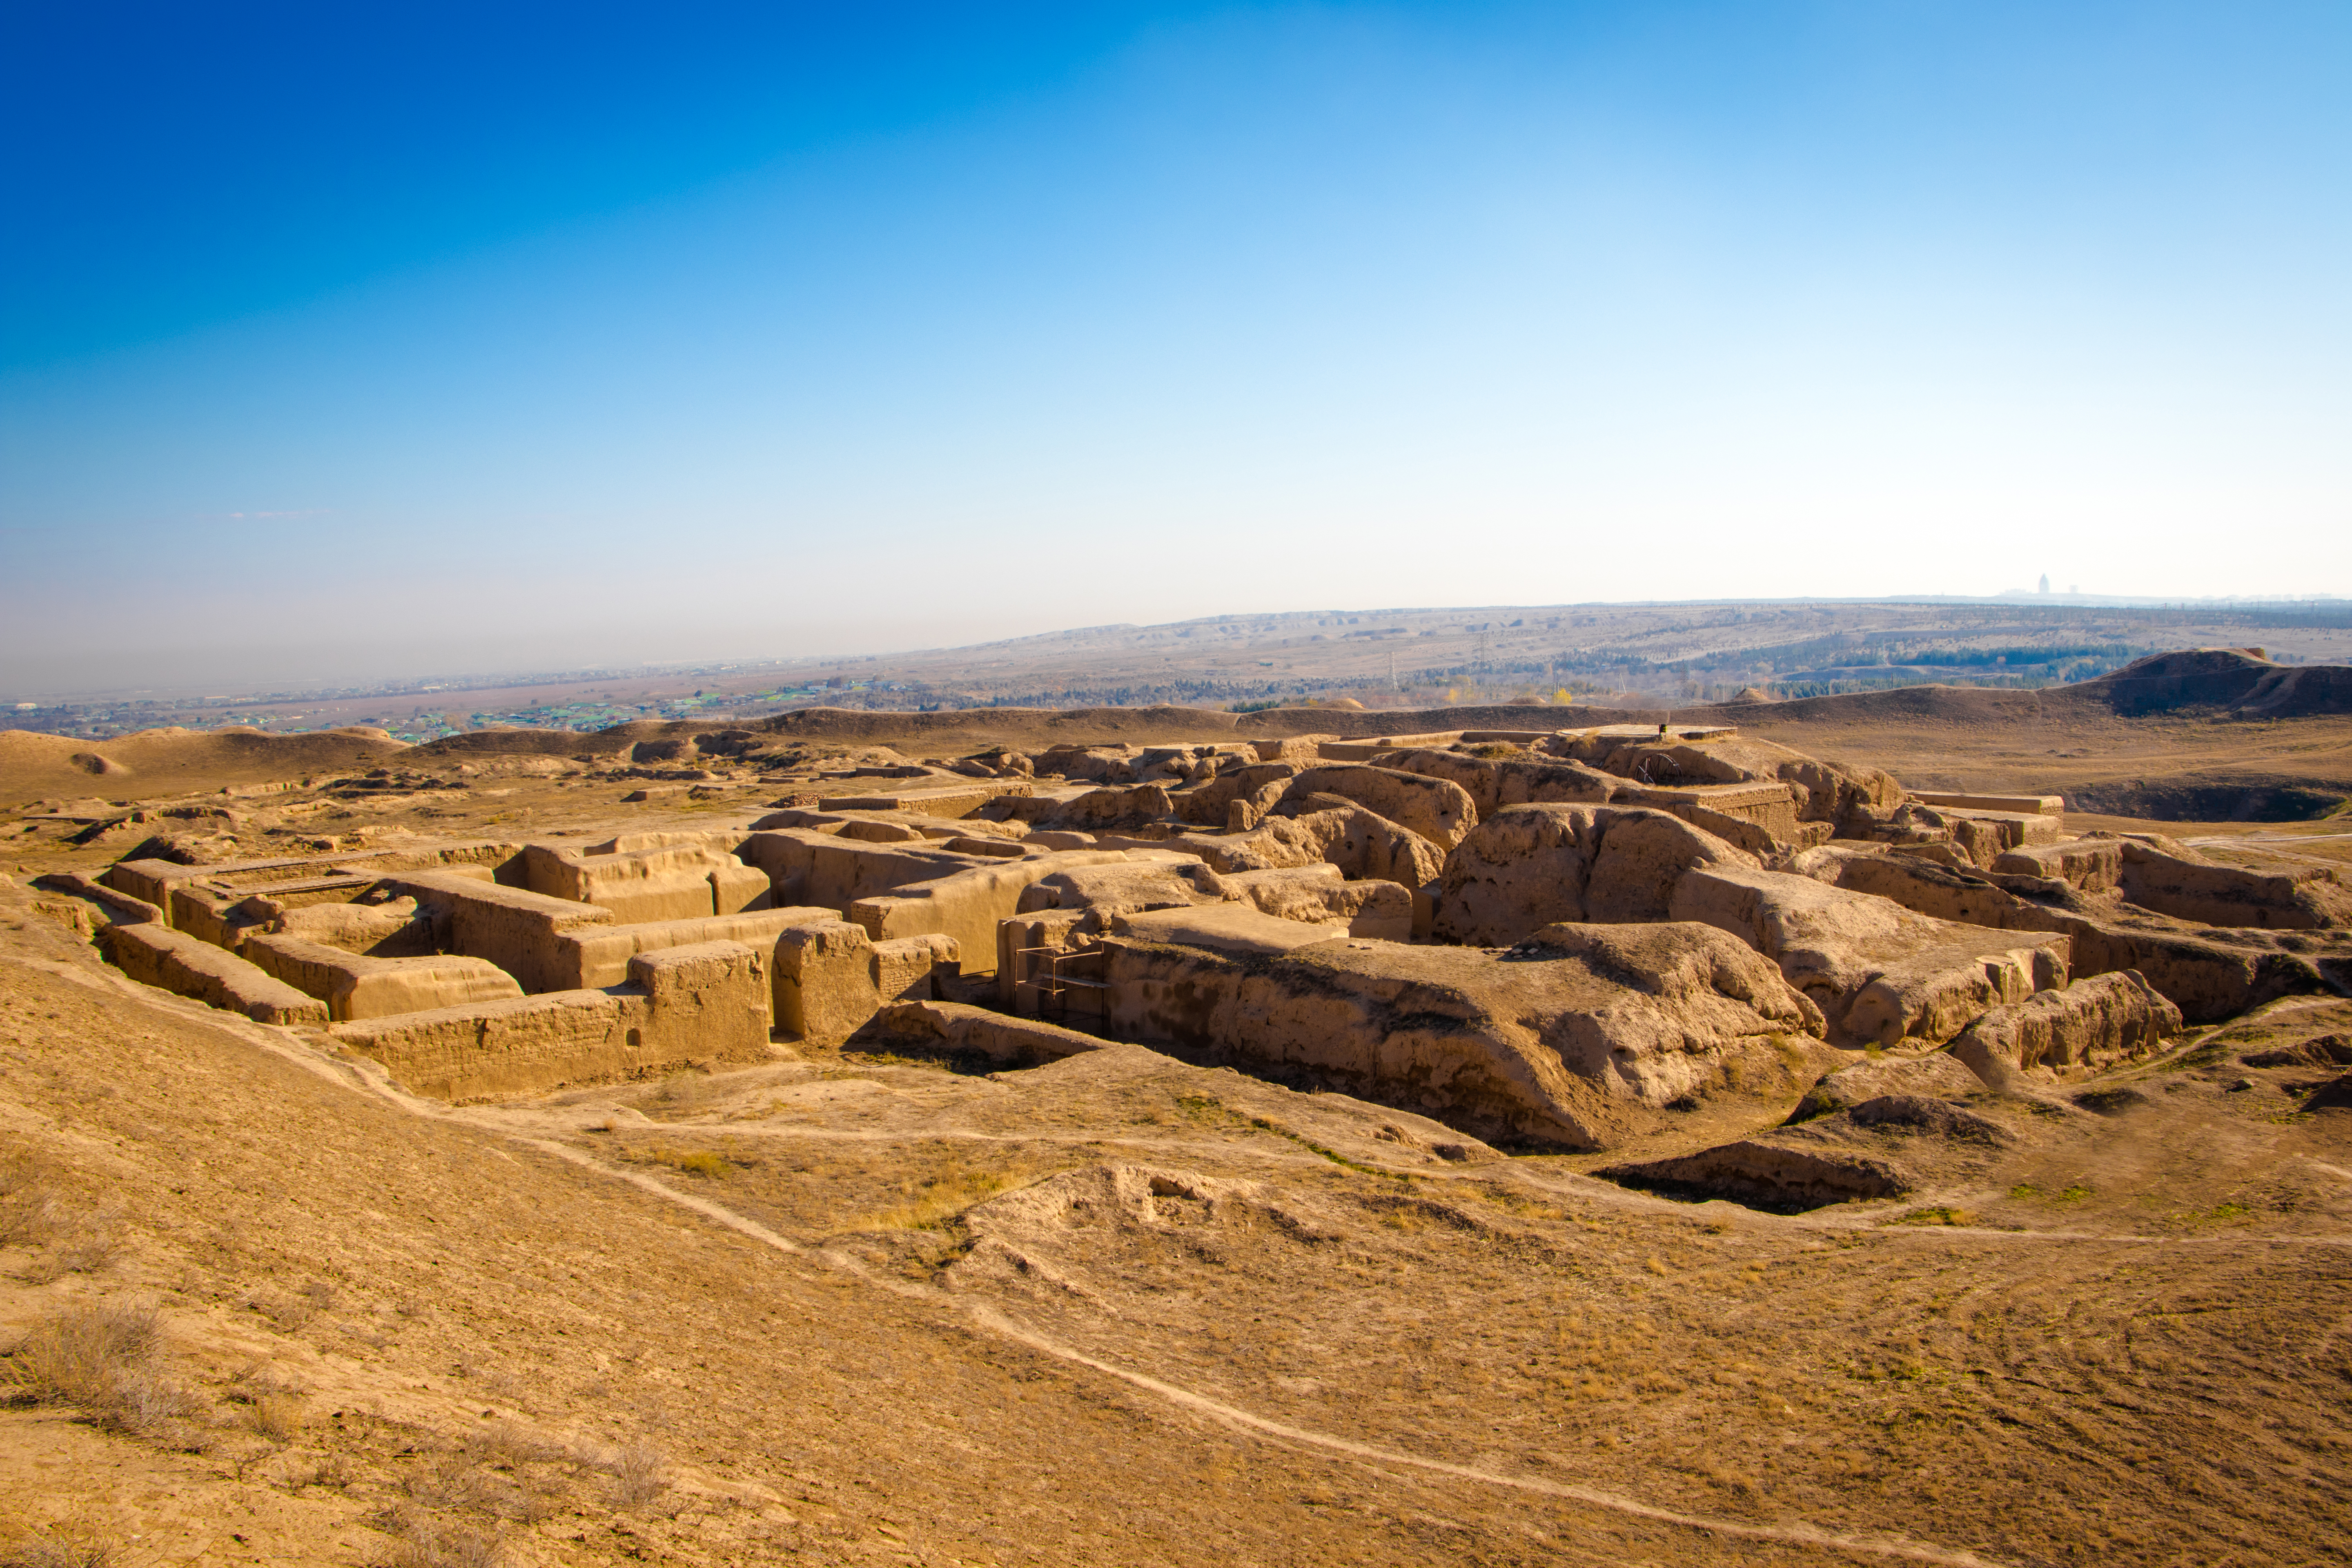 In Nisa, visitors have the opportunity to view the foundations of the influential ancient city. © Eziz Charyyev / Shutterstock